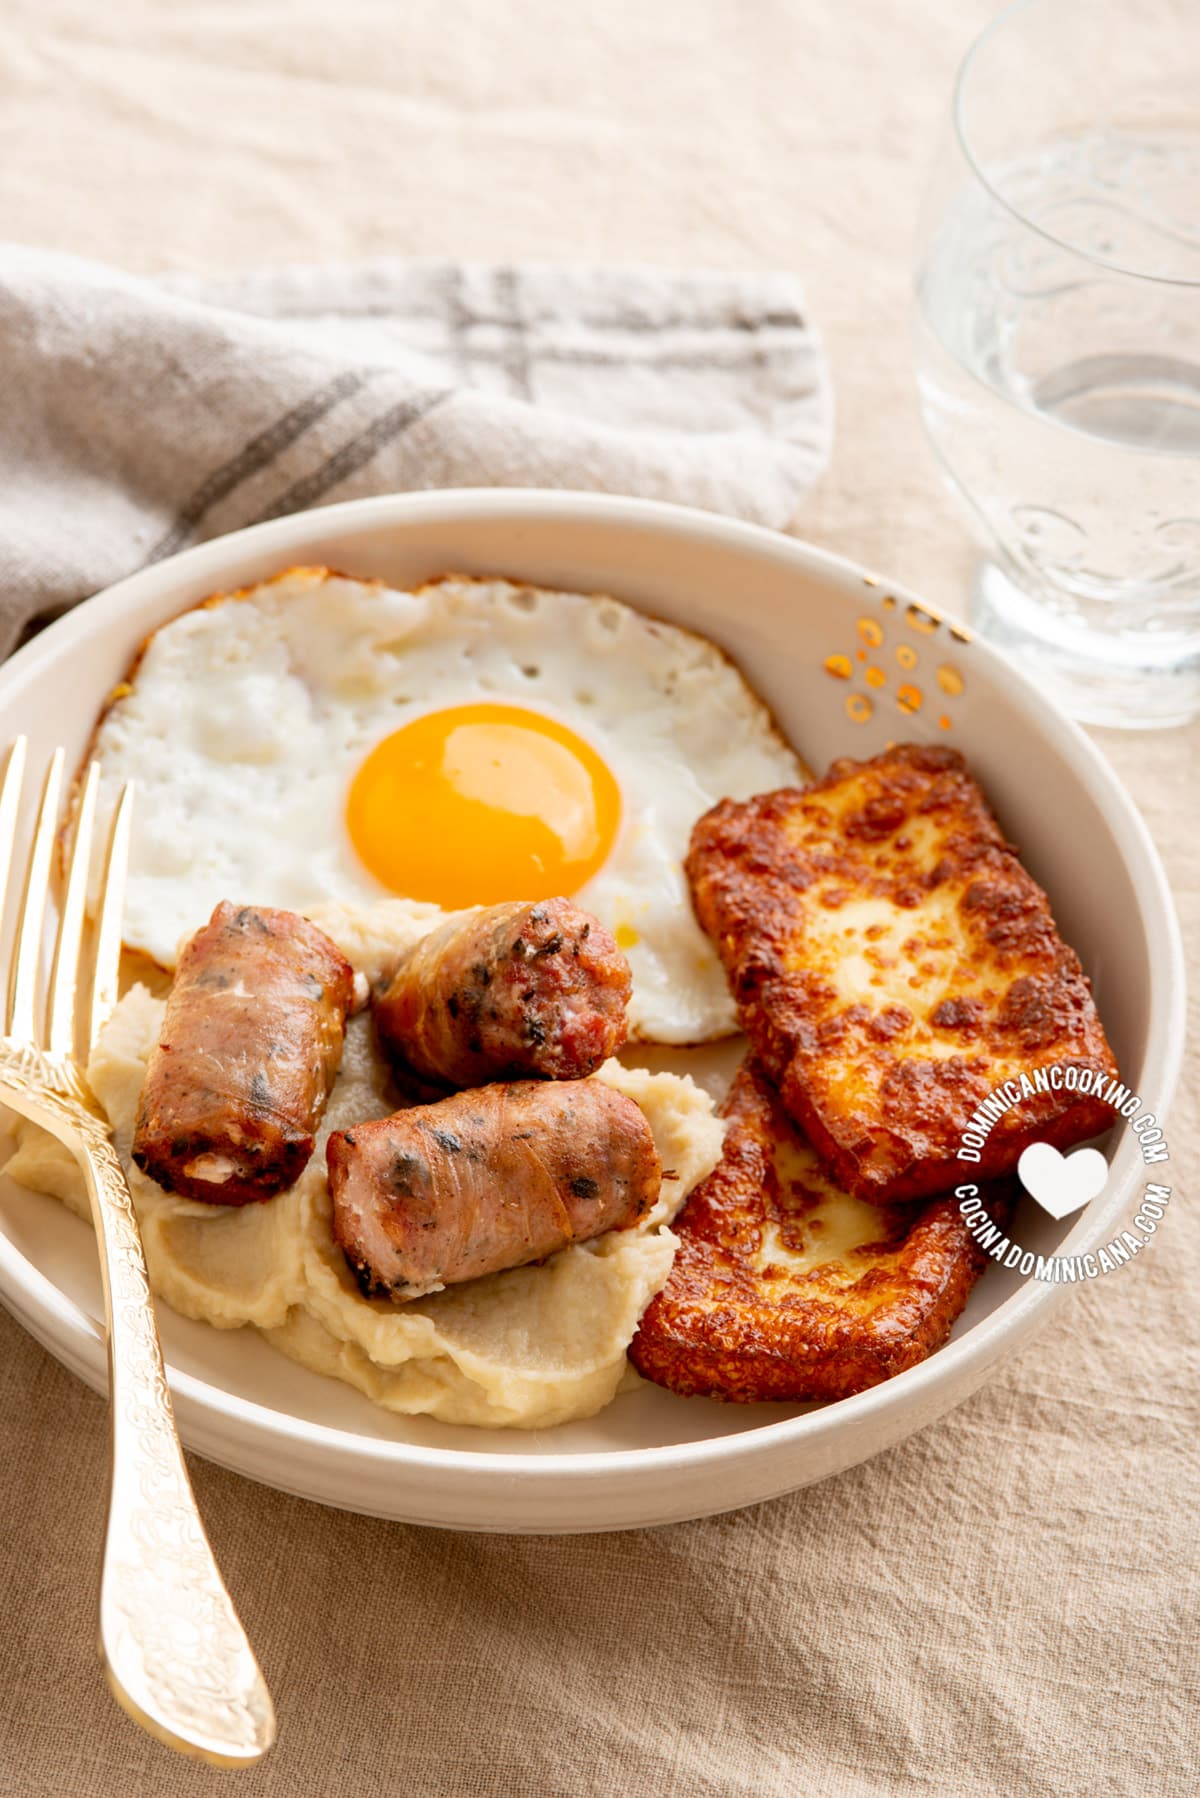 Dominican keto breakfast of fried cheese, egg and sausage with mash